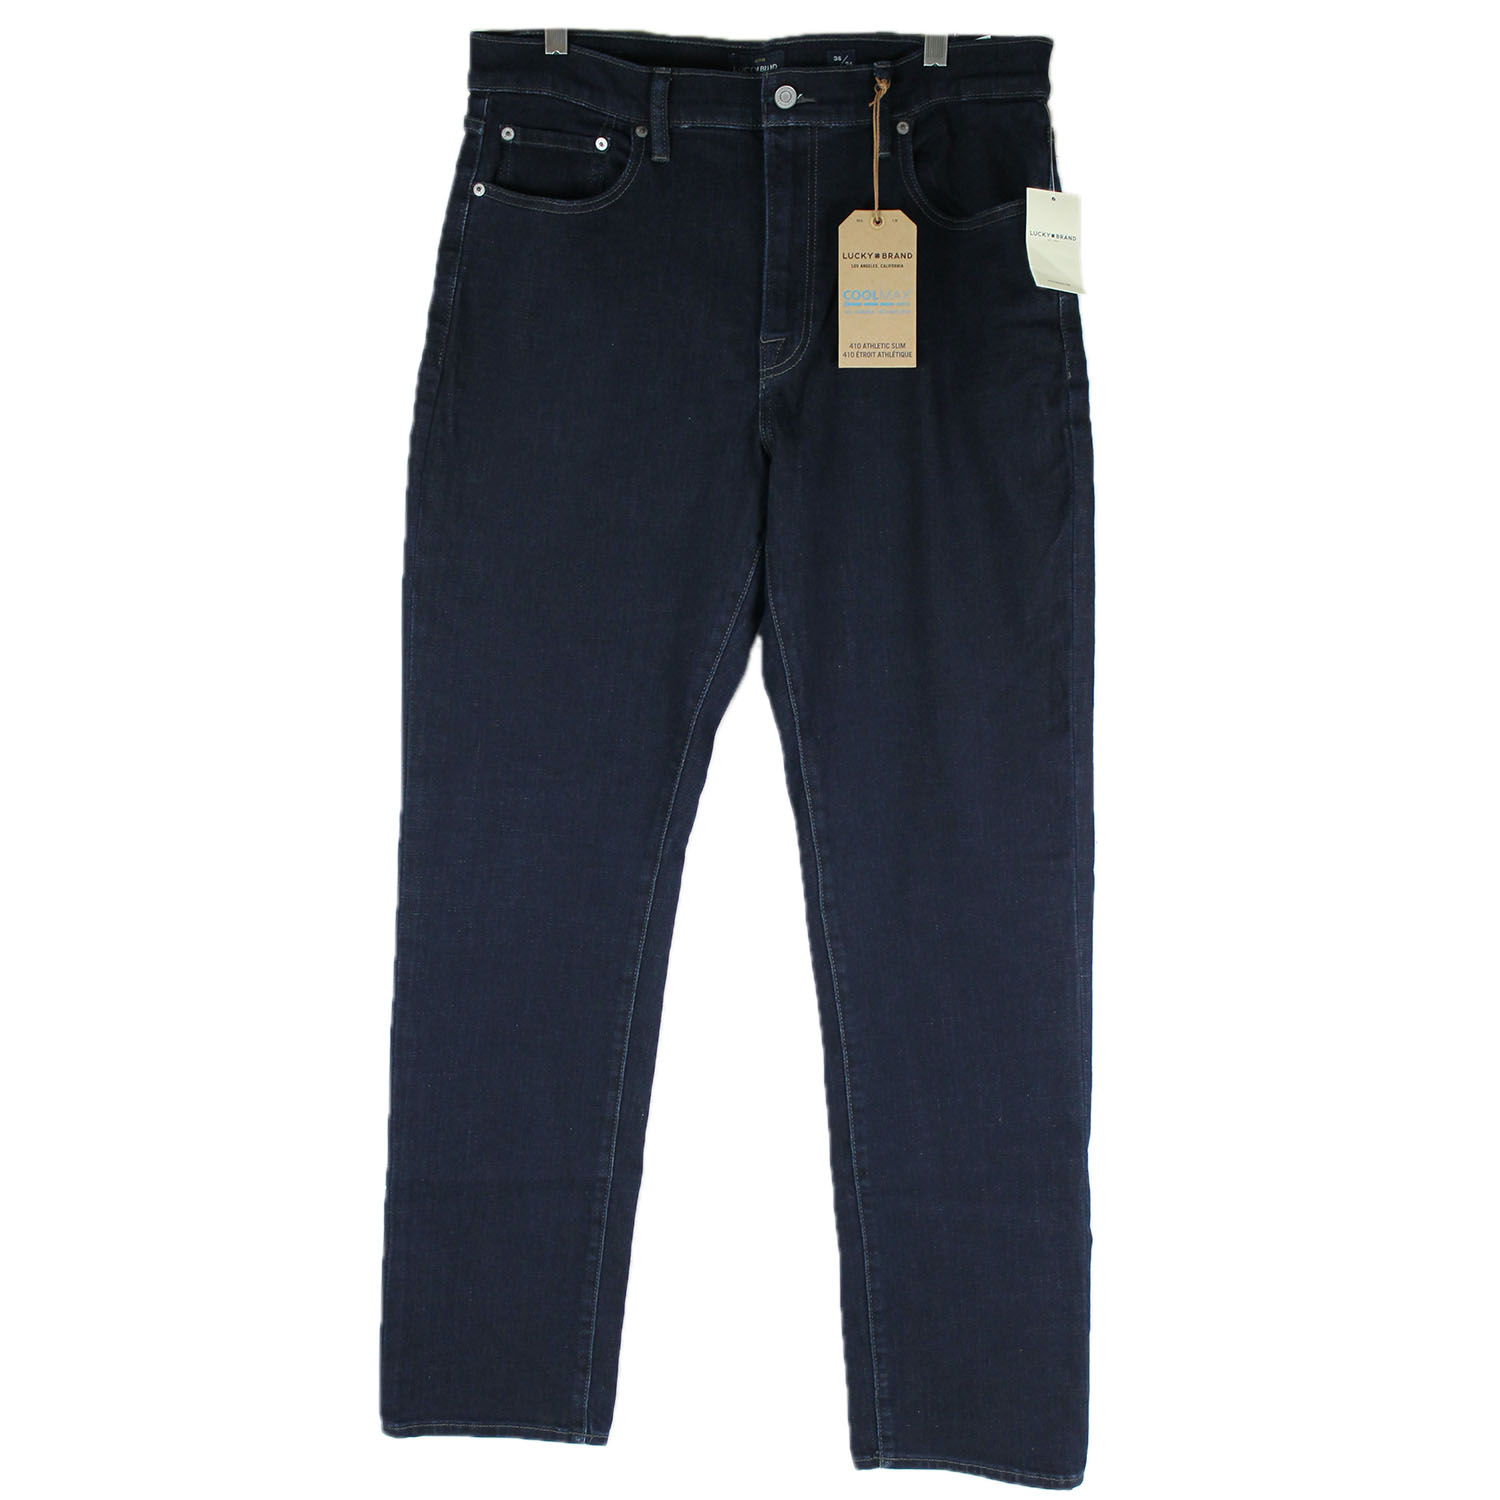 410 lucky brand jeans